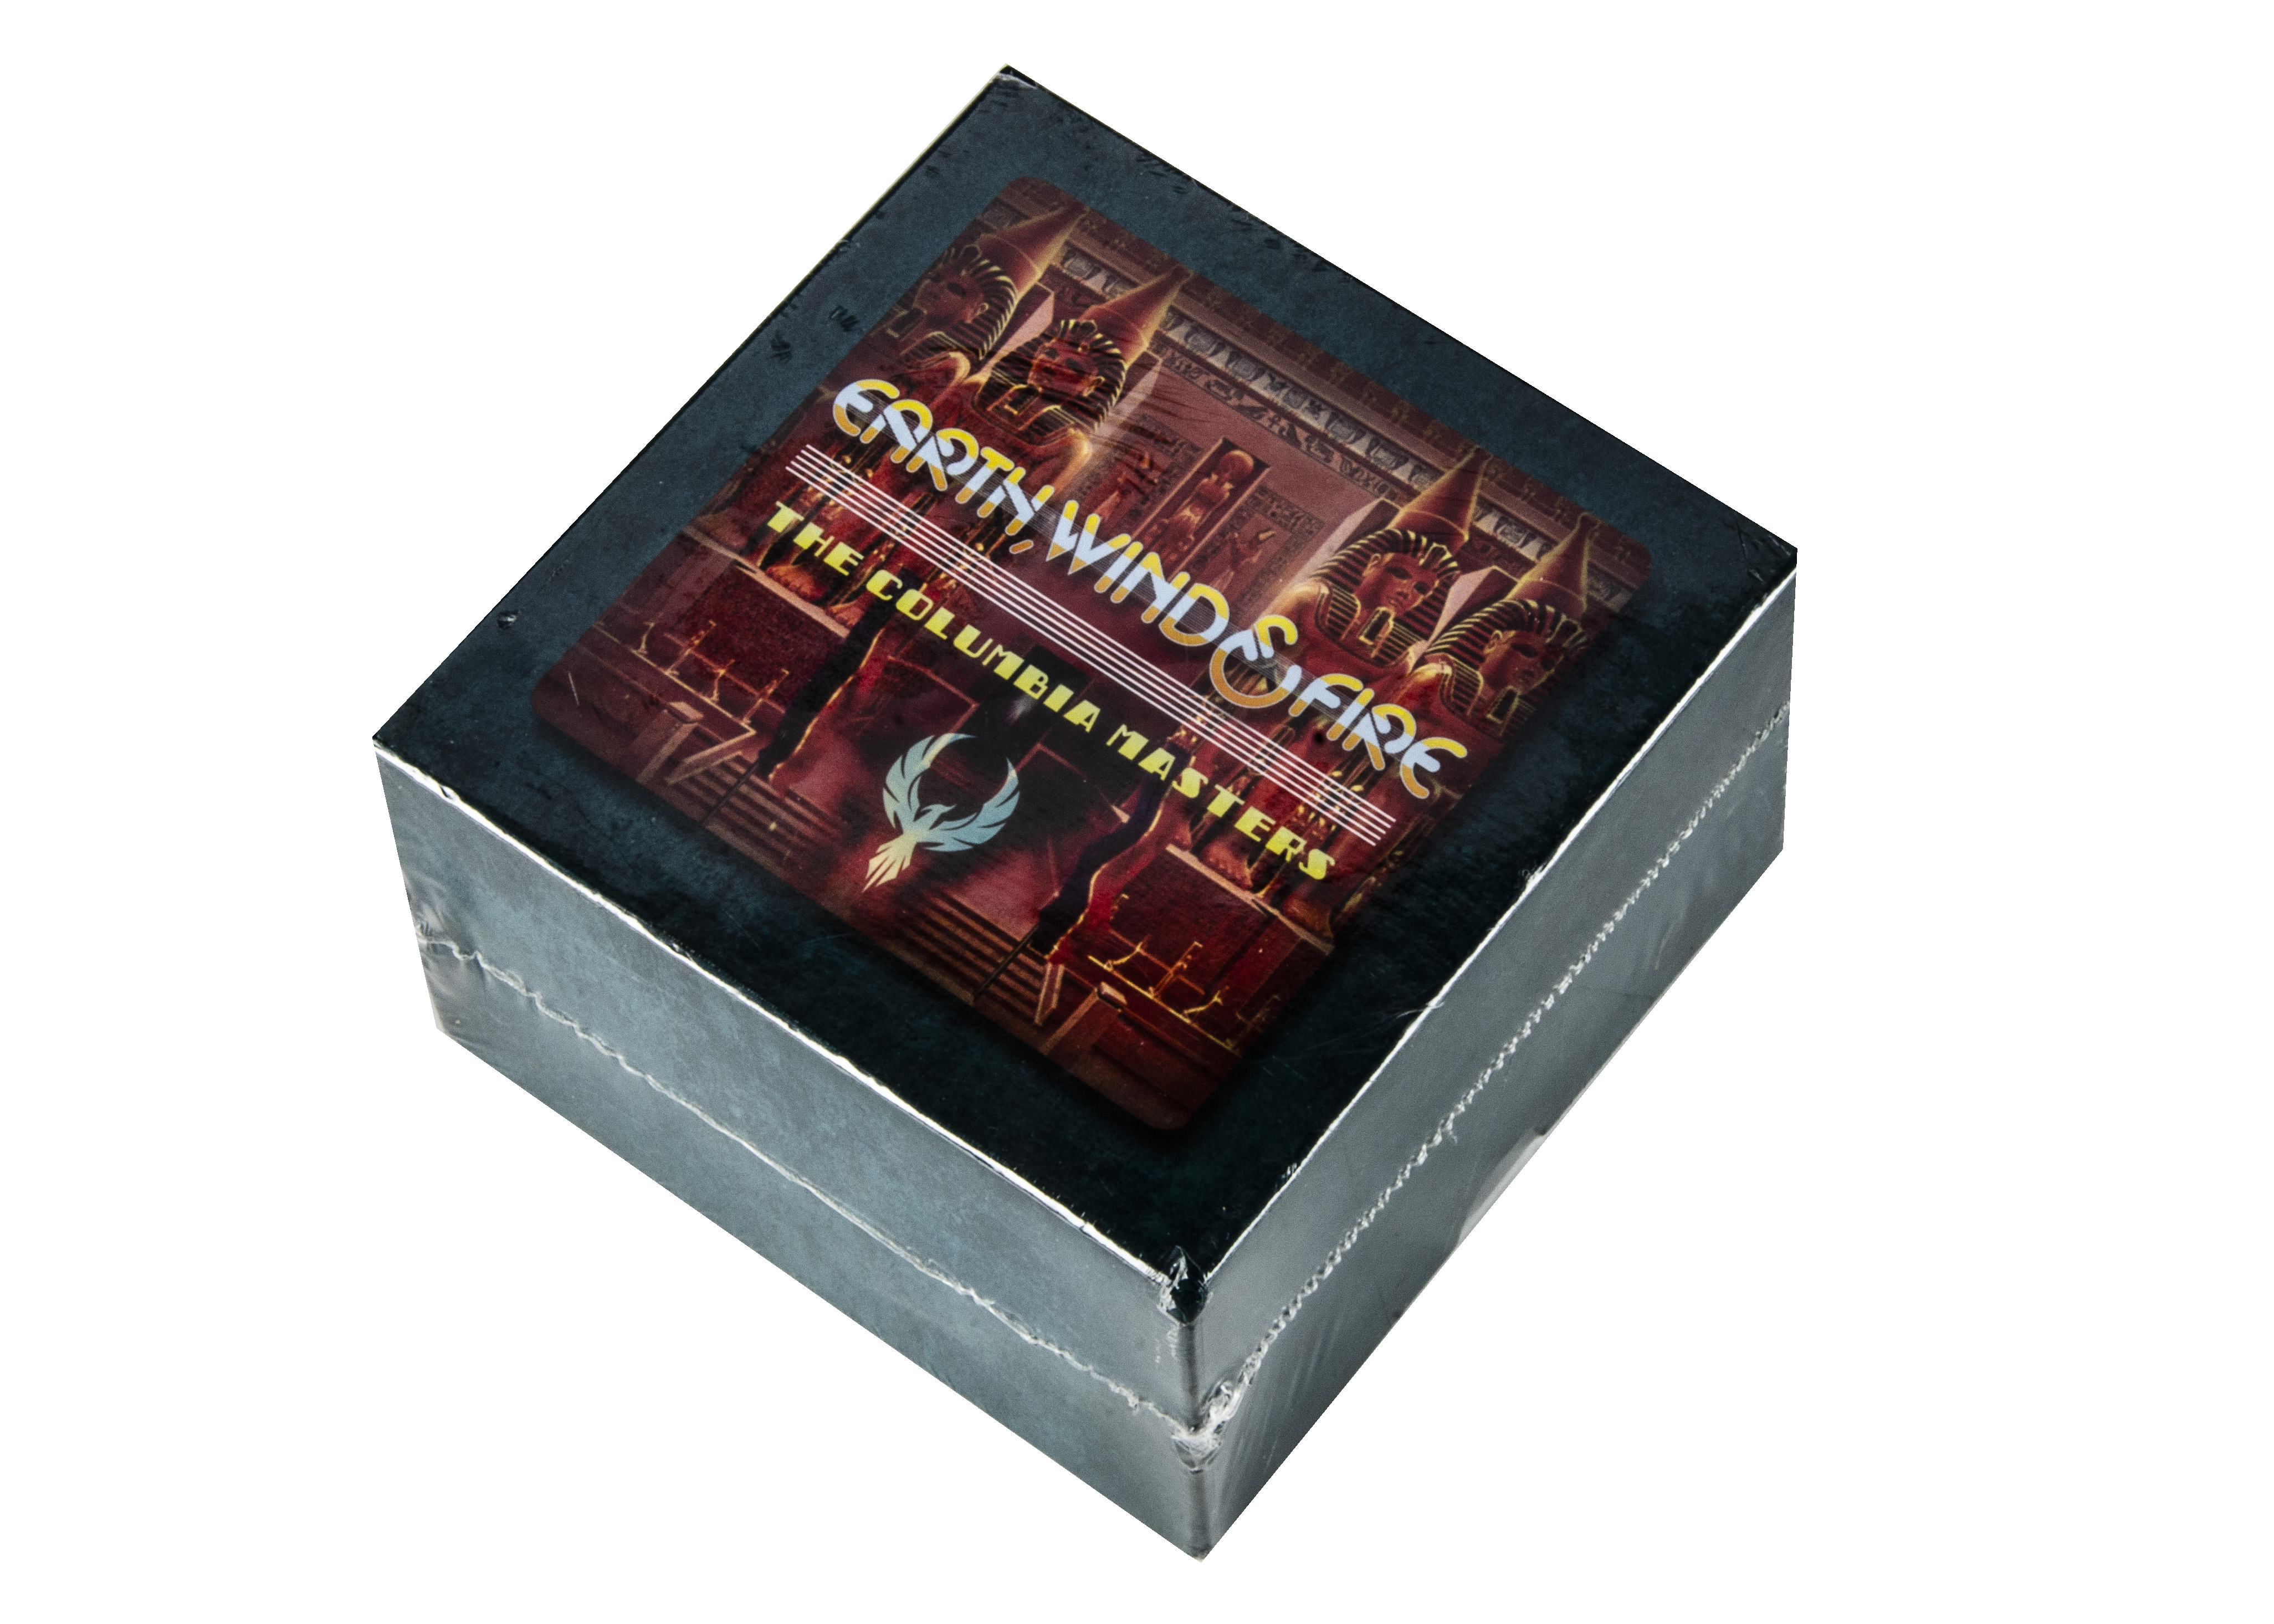 Earth Wind & Fire Box Set, The Columbia Masters - sixteen CD Box Set released 2011 on Sony (